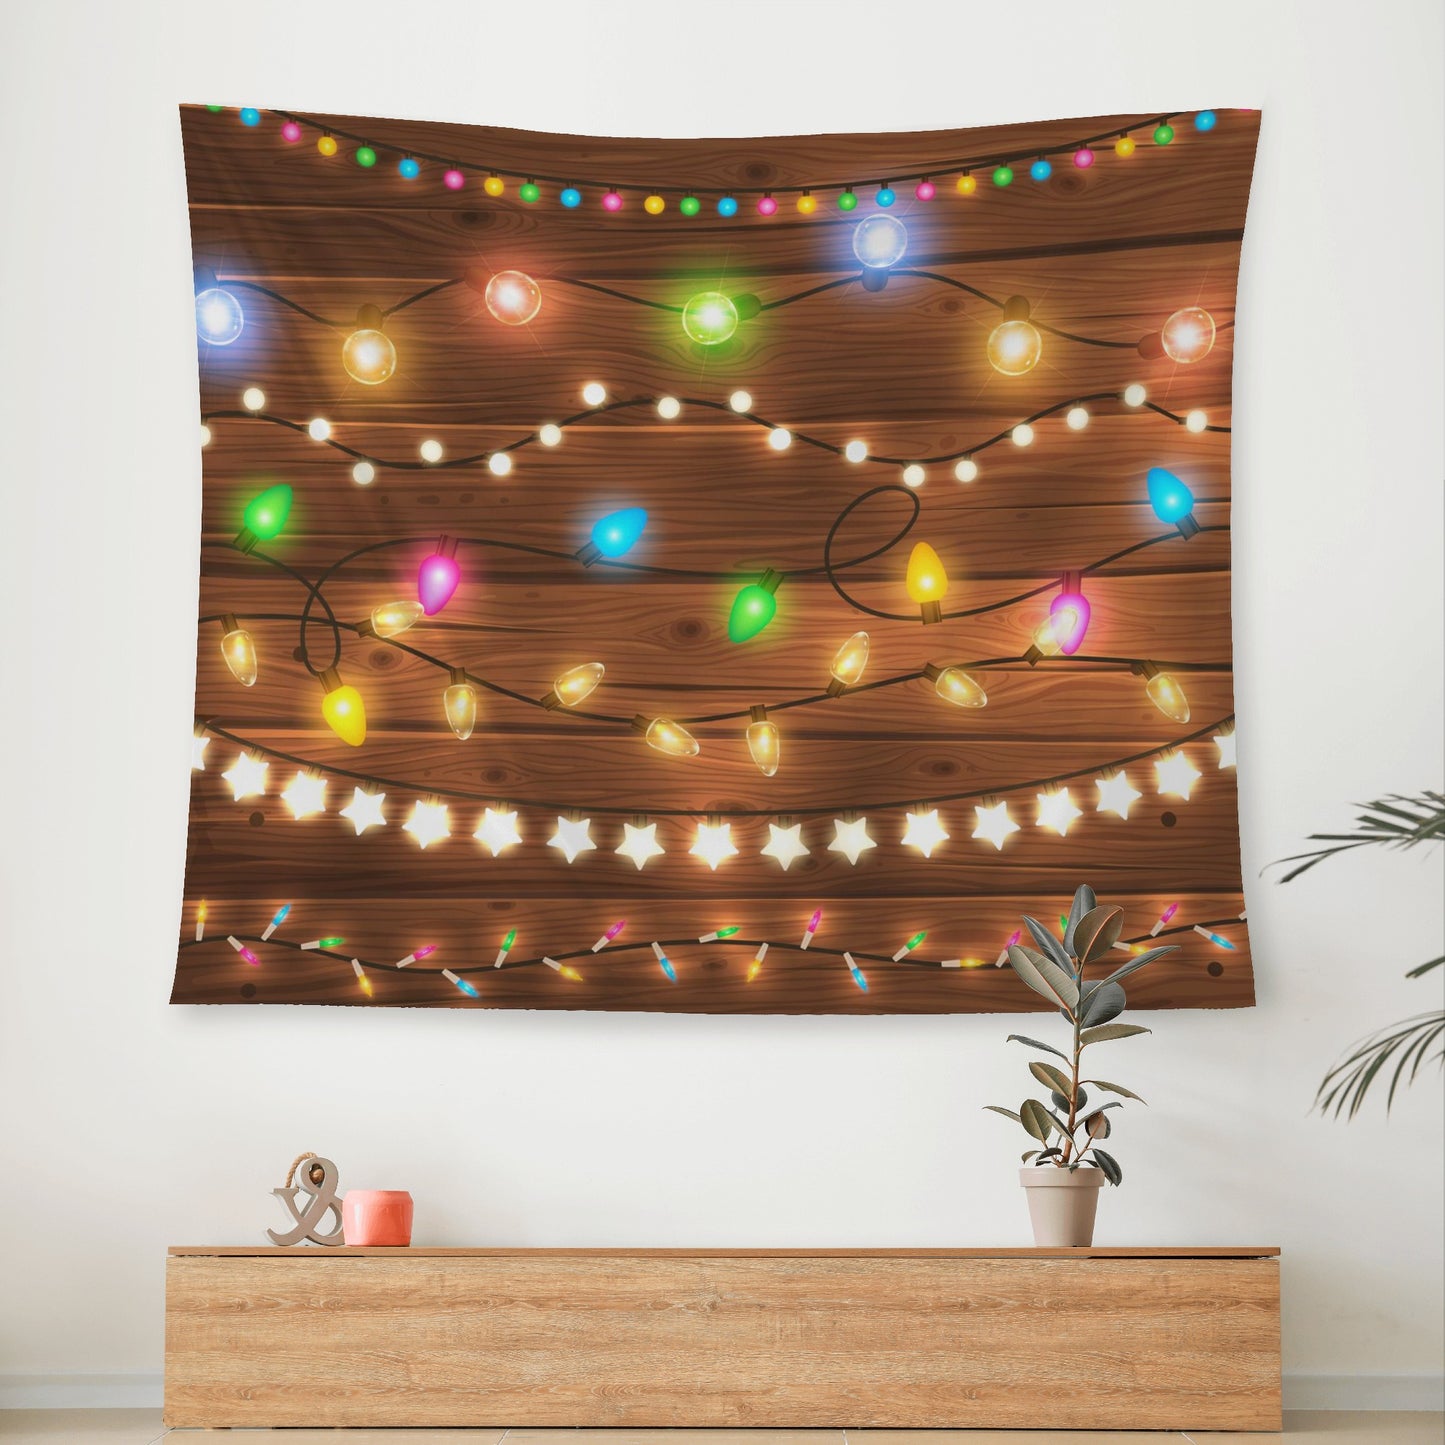 Go Green This Year And Avoid the Lights With the Creative Wall Tapestry